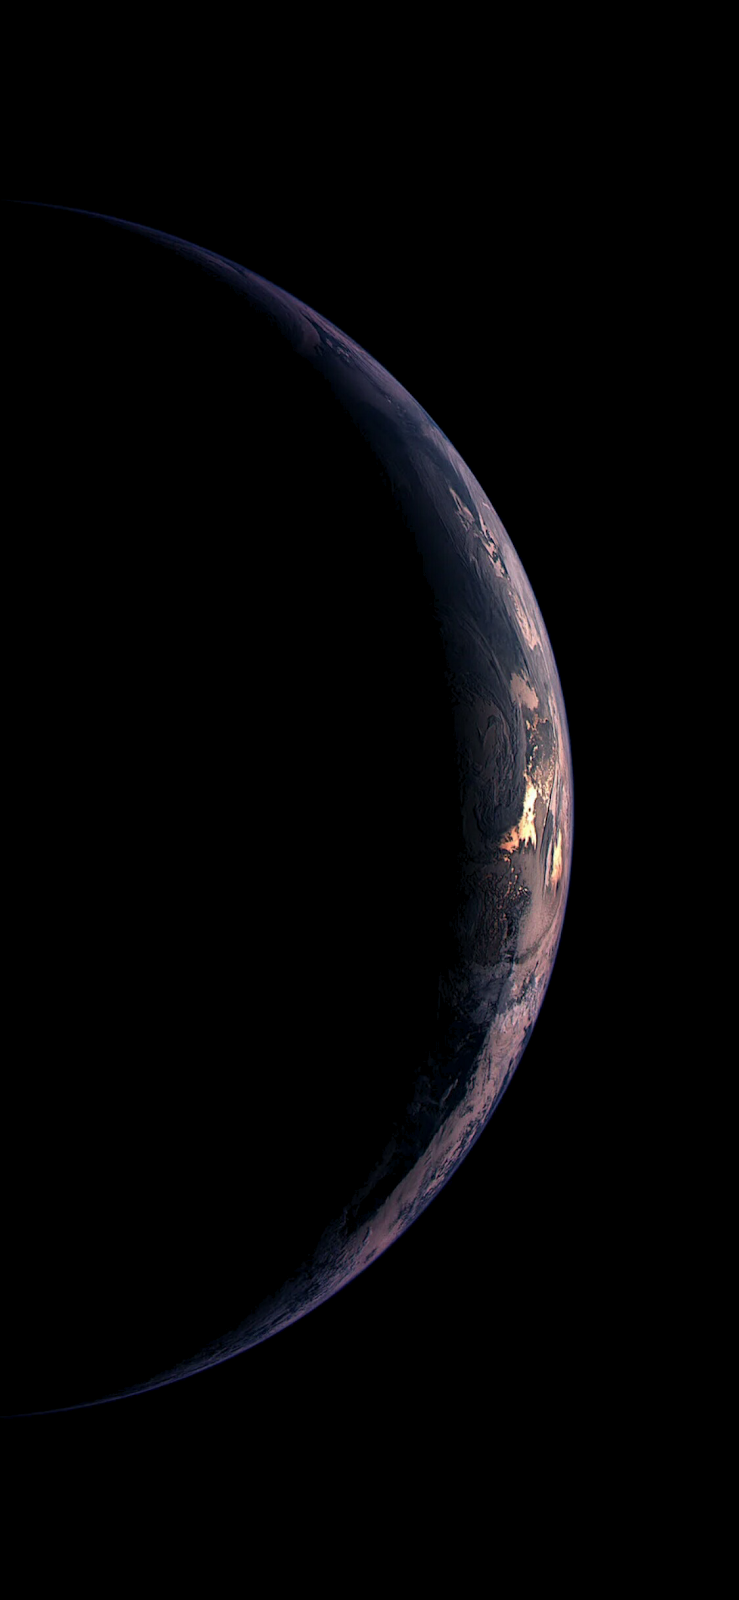 Earth For iPhone X Xs Amoled Display Wallpaper